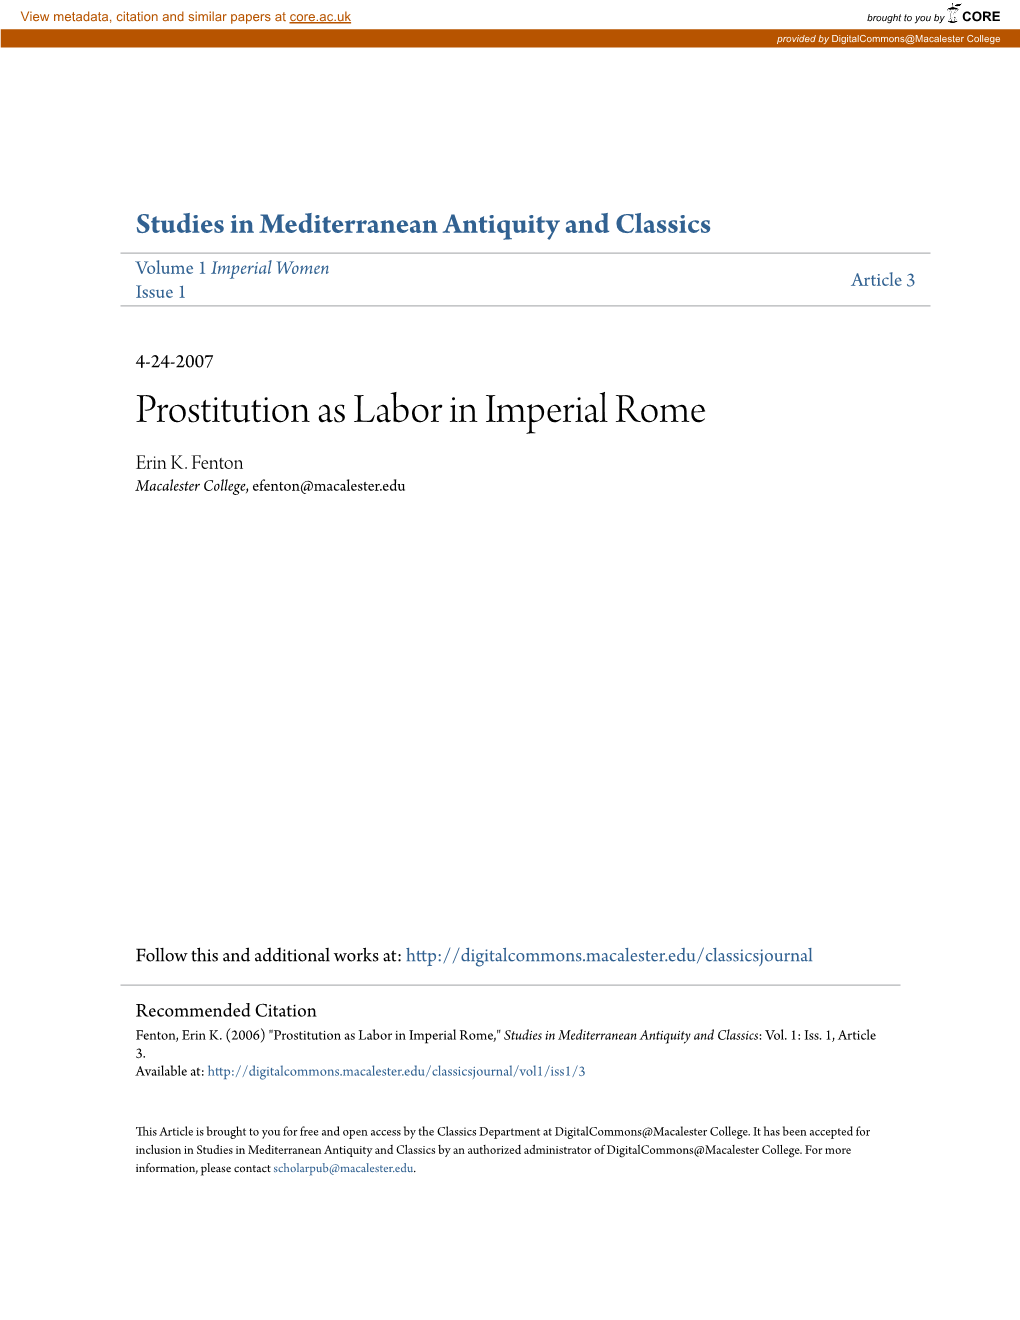 Prostitution As Labor in Imperial Rome Erin K